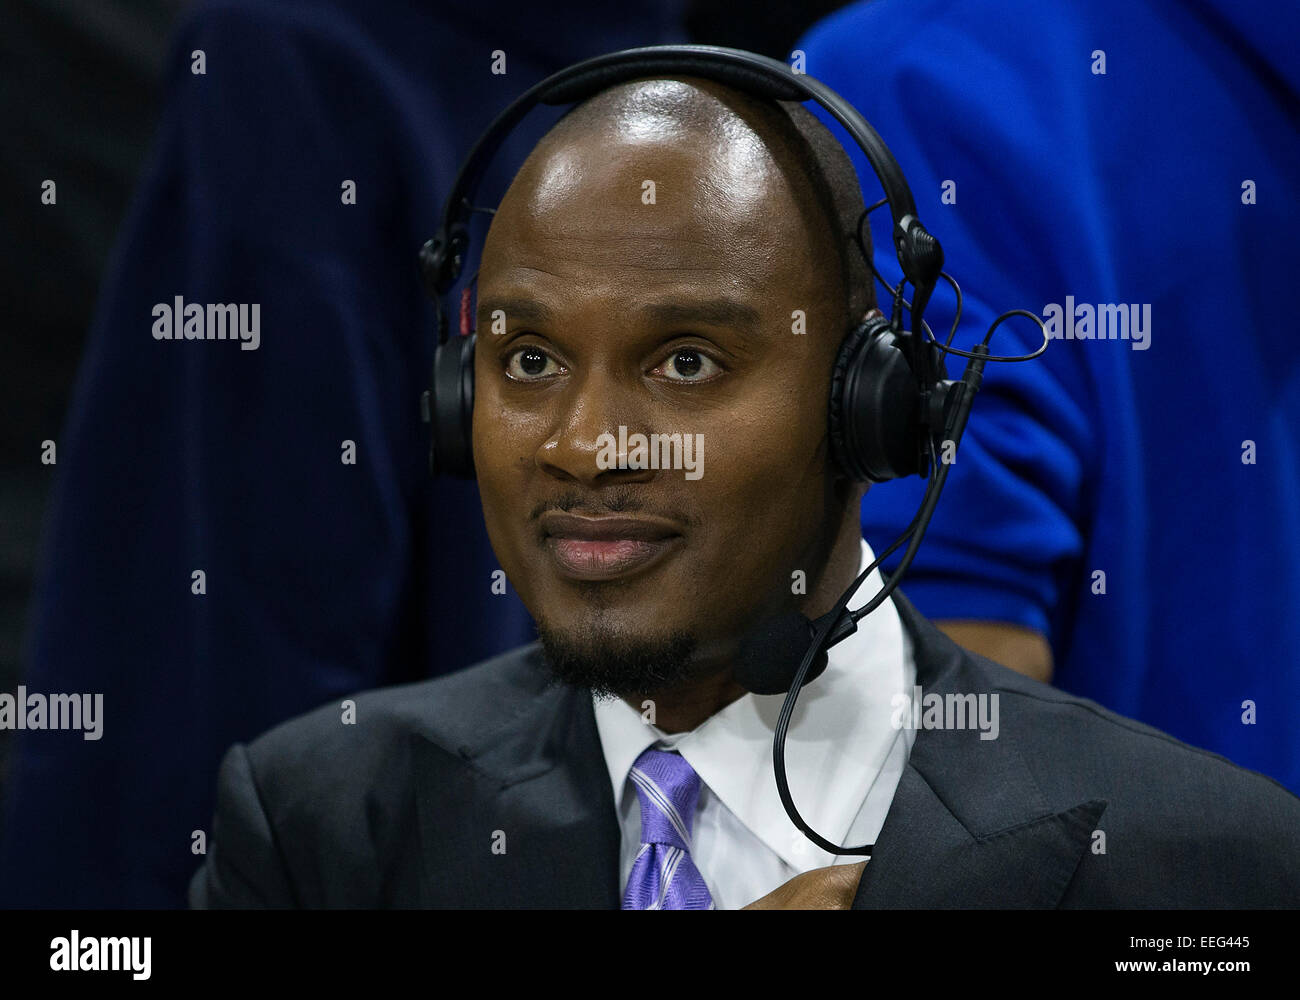 Download preview image - south-bend-indiana-usa-17th-jan-2015-espn-analyst-laphonso-ellis-during-EEG445